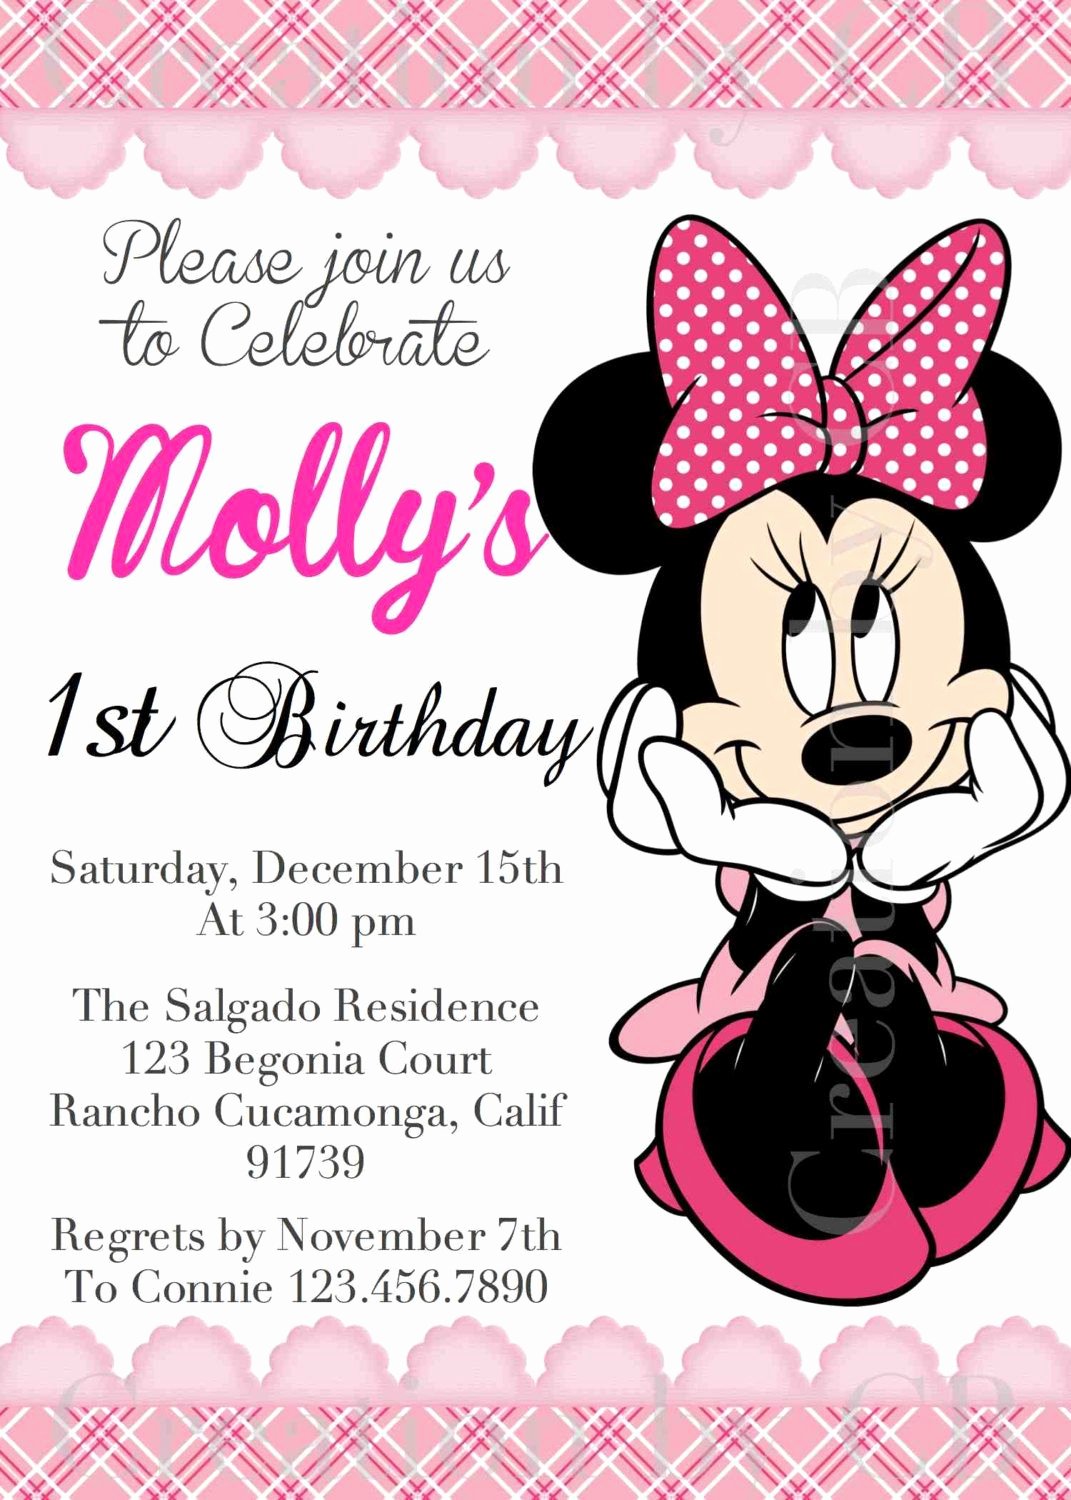 Minnie Mouse Birthday Invitations New This Graphic Minnie Mouse Birthday Invitation Minnie